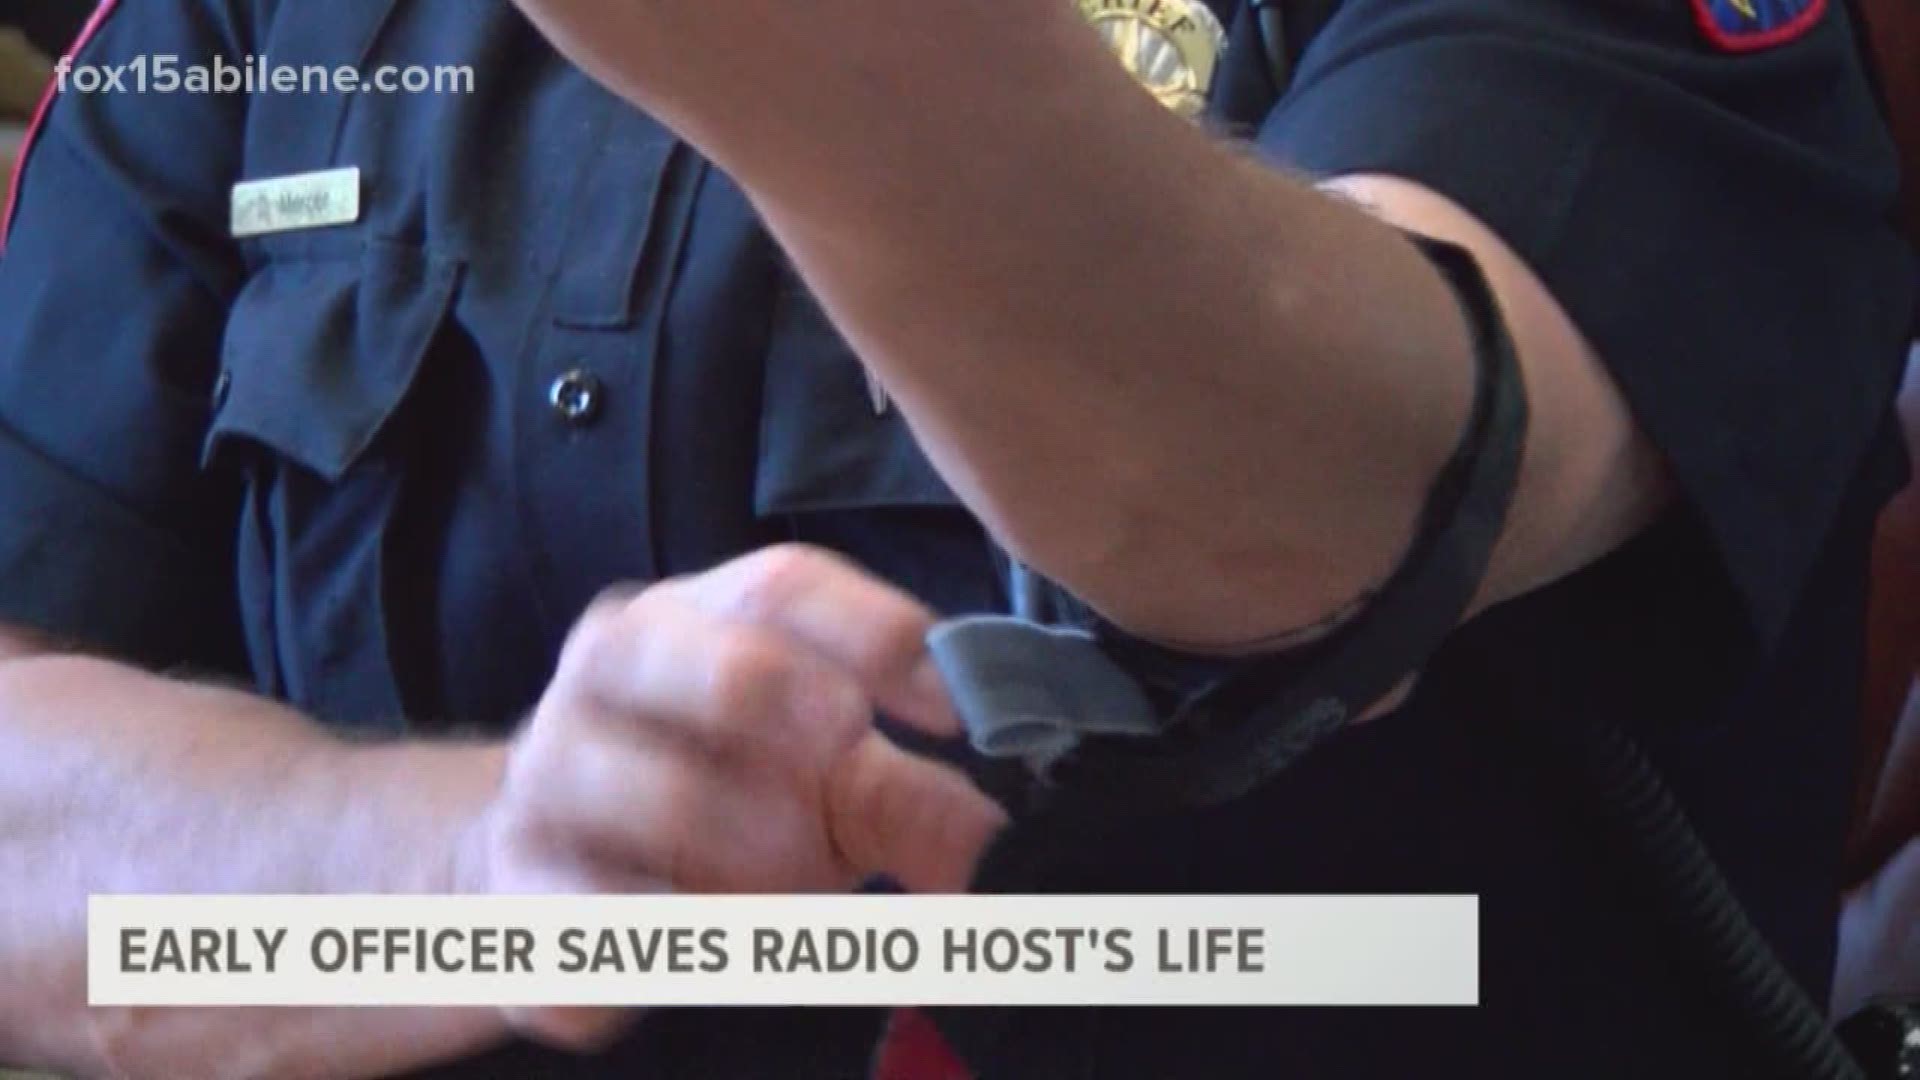 Officer saves life of Coleman radio host.